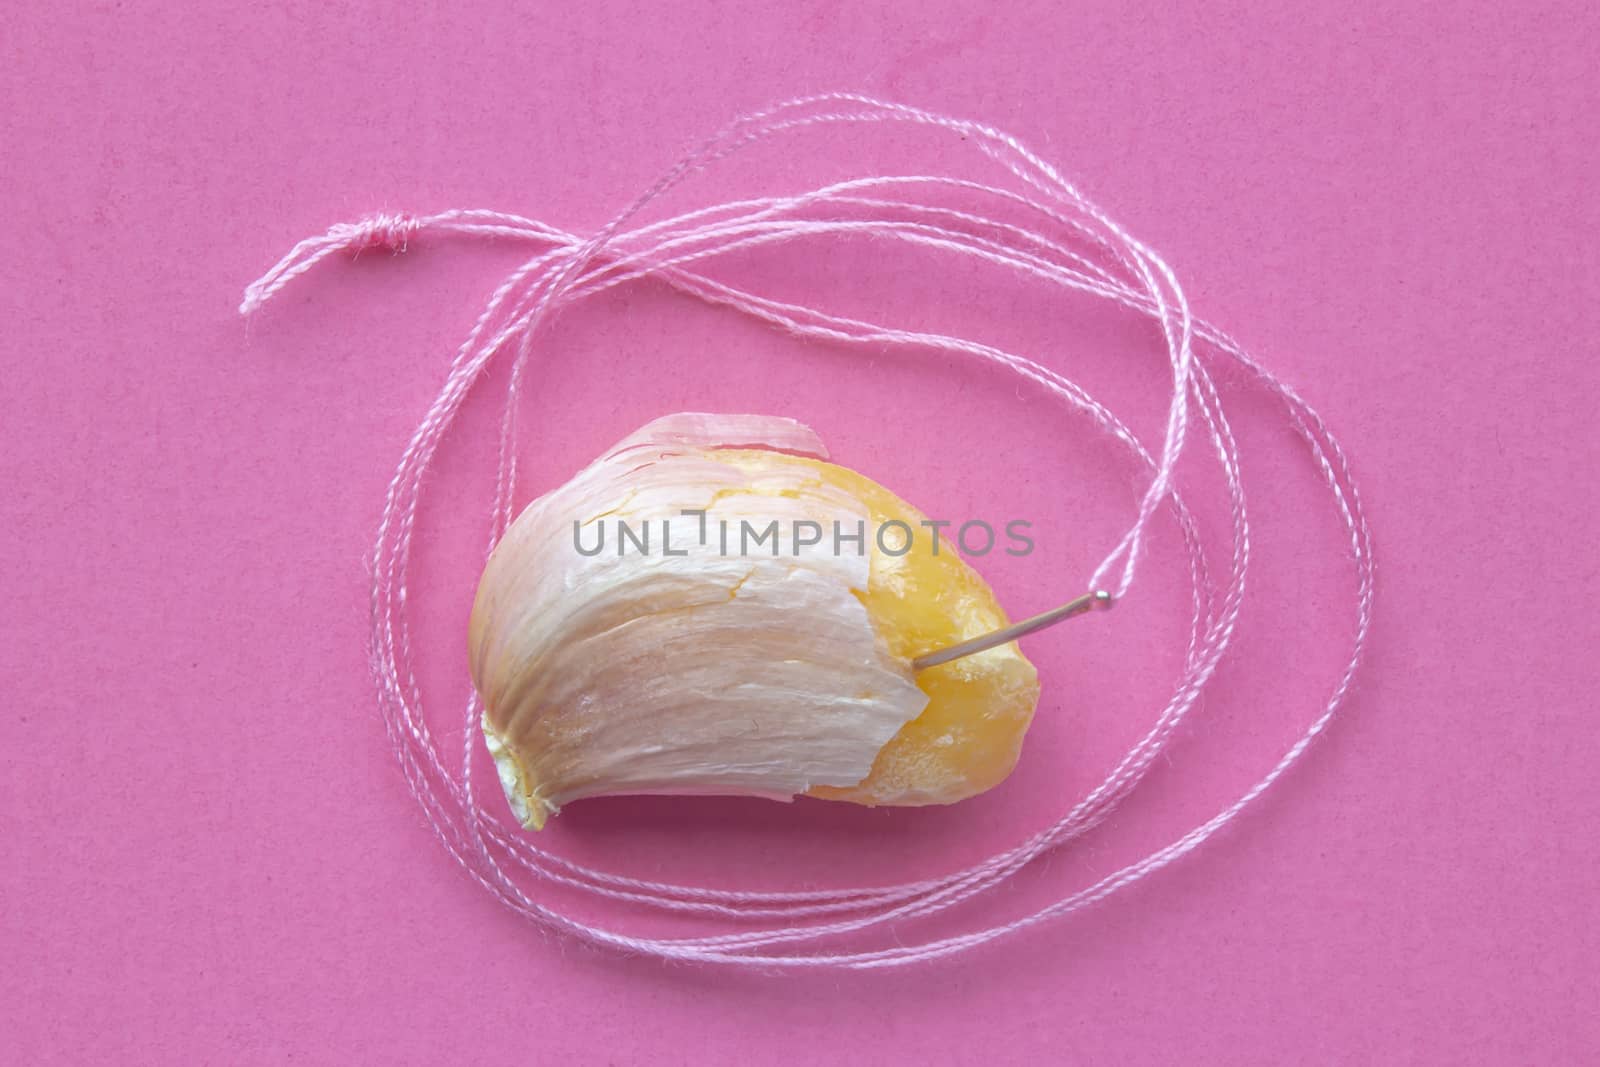 A single garlic with sewing needle and a pink Spool Of Pink Sewing Thread With Needle and pink background on the center.